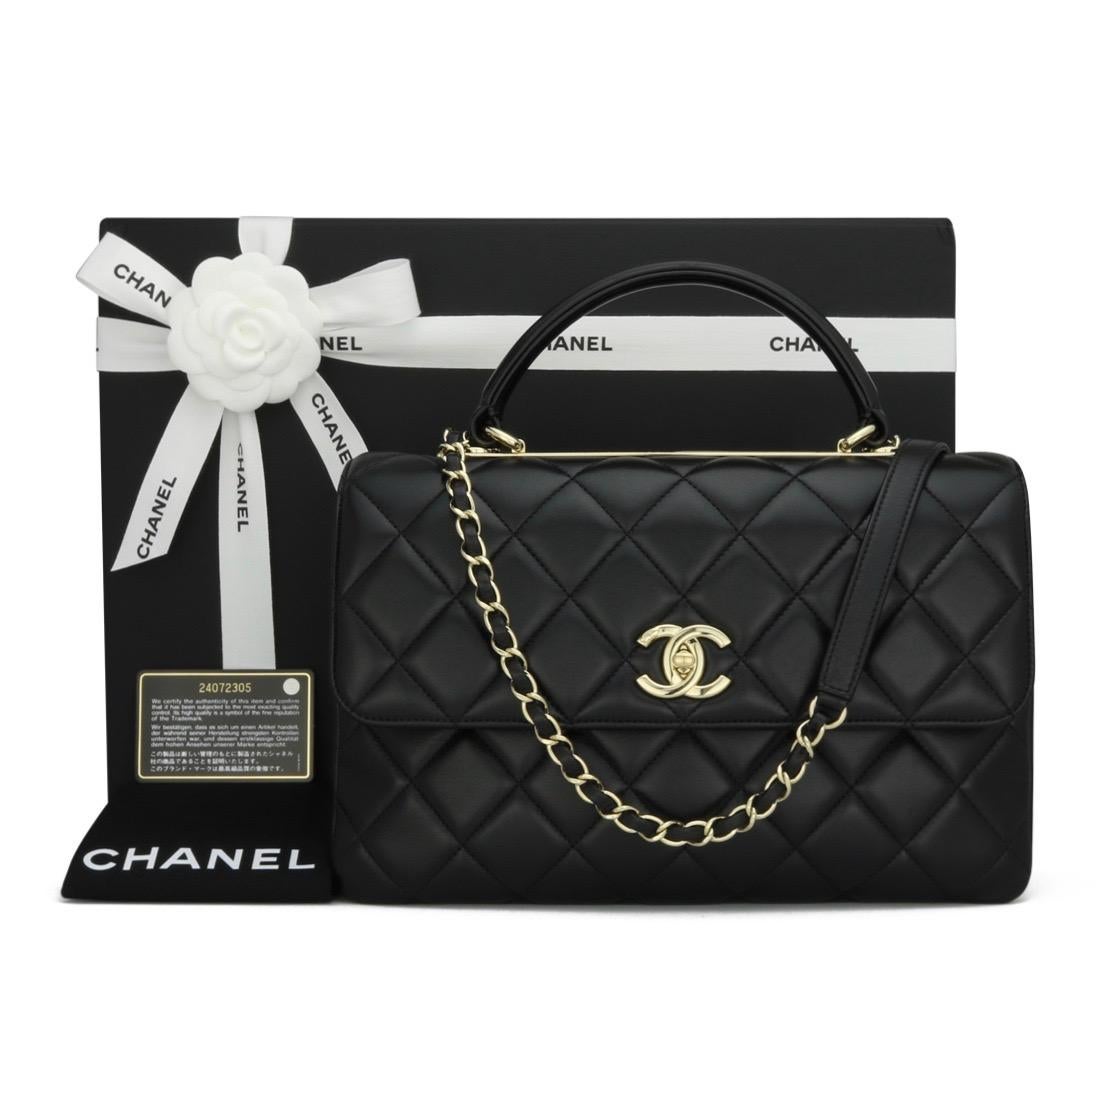 CHANEL Trendy CC Top Handle Bag Medium Black Lambskin with Light Gold-Tone Hardware 2017 - 17P.

This stunning bag is in very good condition. It still holds its original shape, and the hardware is very shiny.

This top-handle bag is simply gorgeous